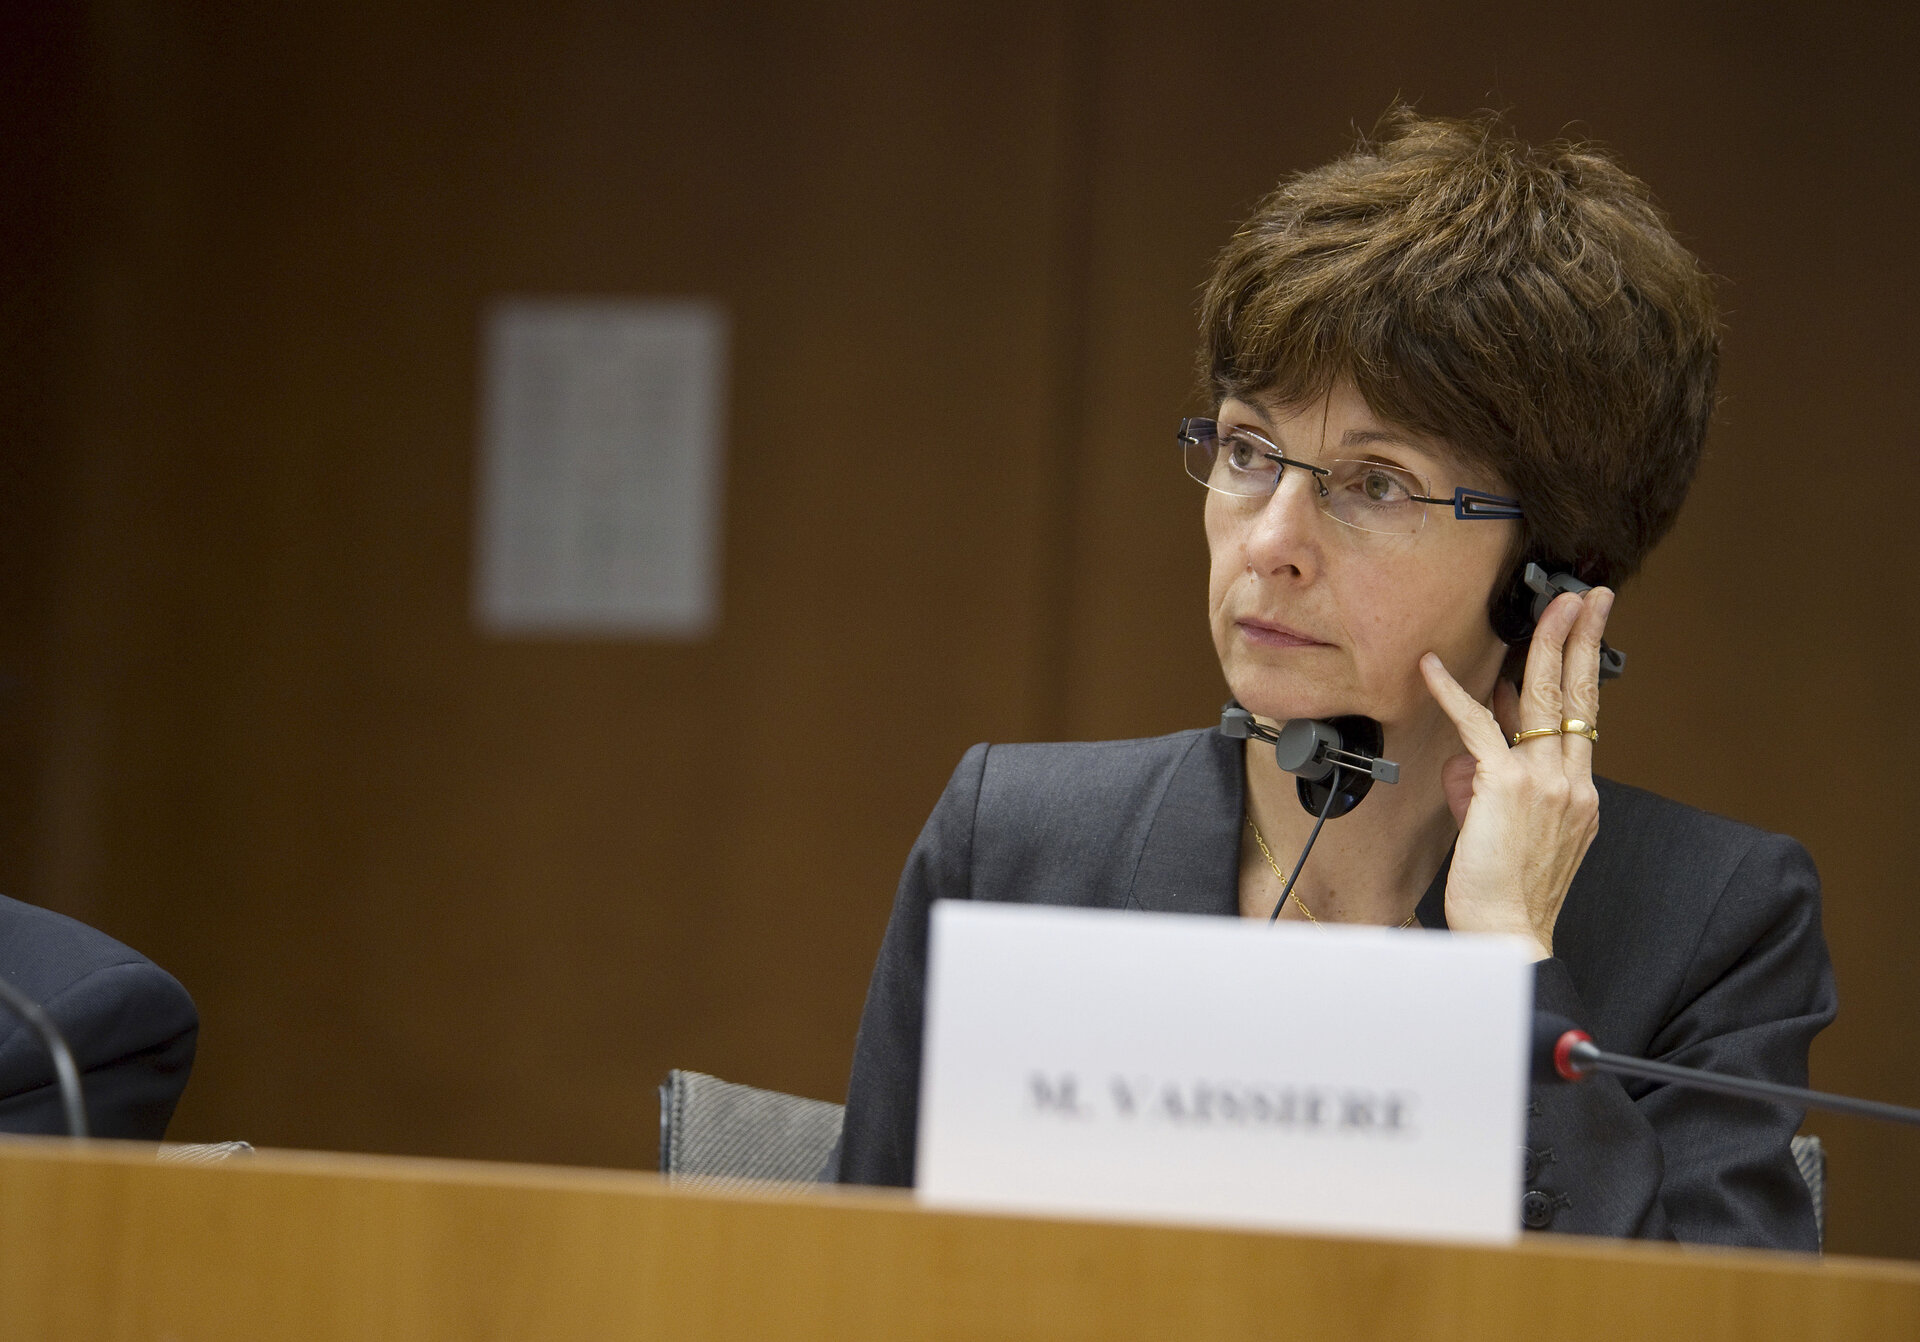 Magali Vaissiere, ESA Director of Telecommunications and Integrated Applications, at the 4th Conference on EU Space Policy